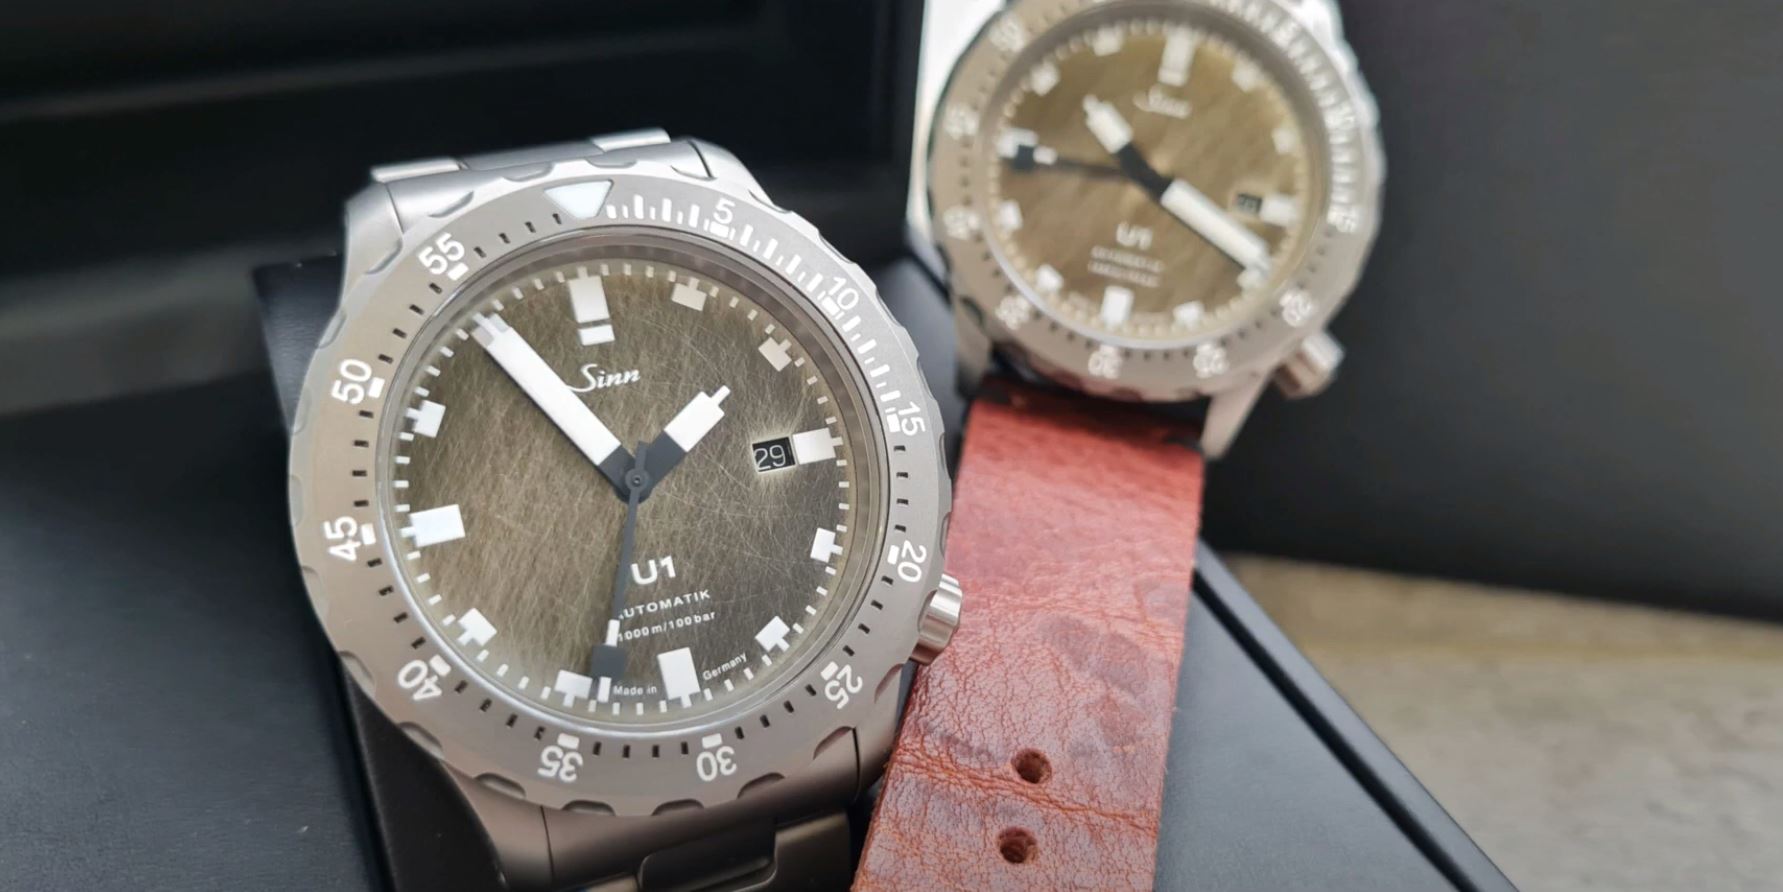 Articles - Define Watches